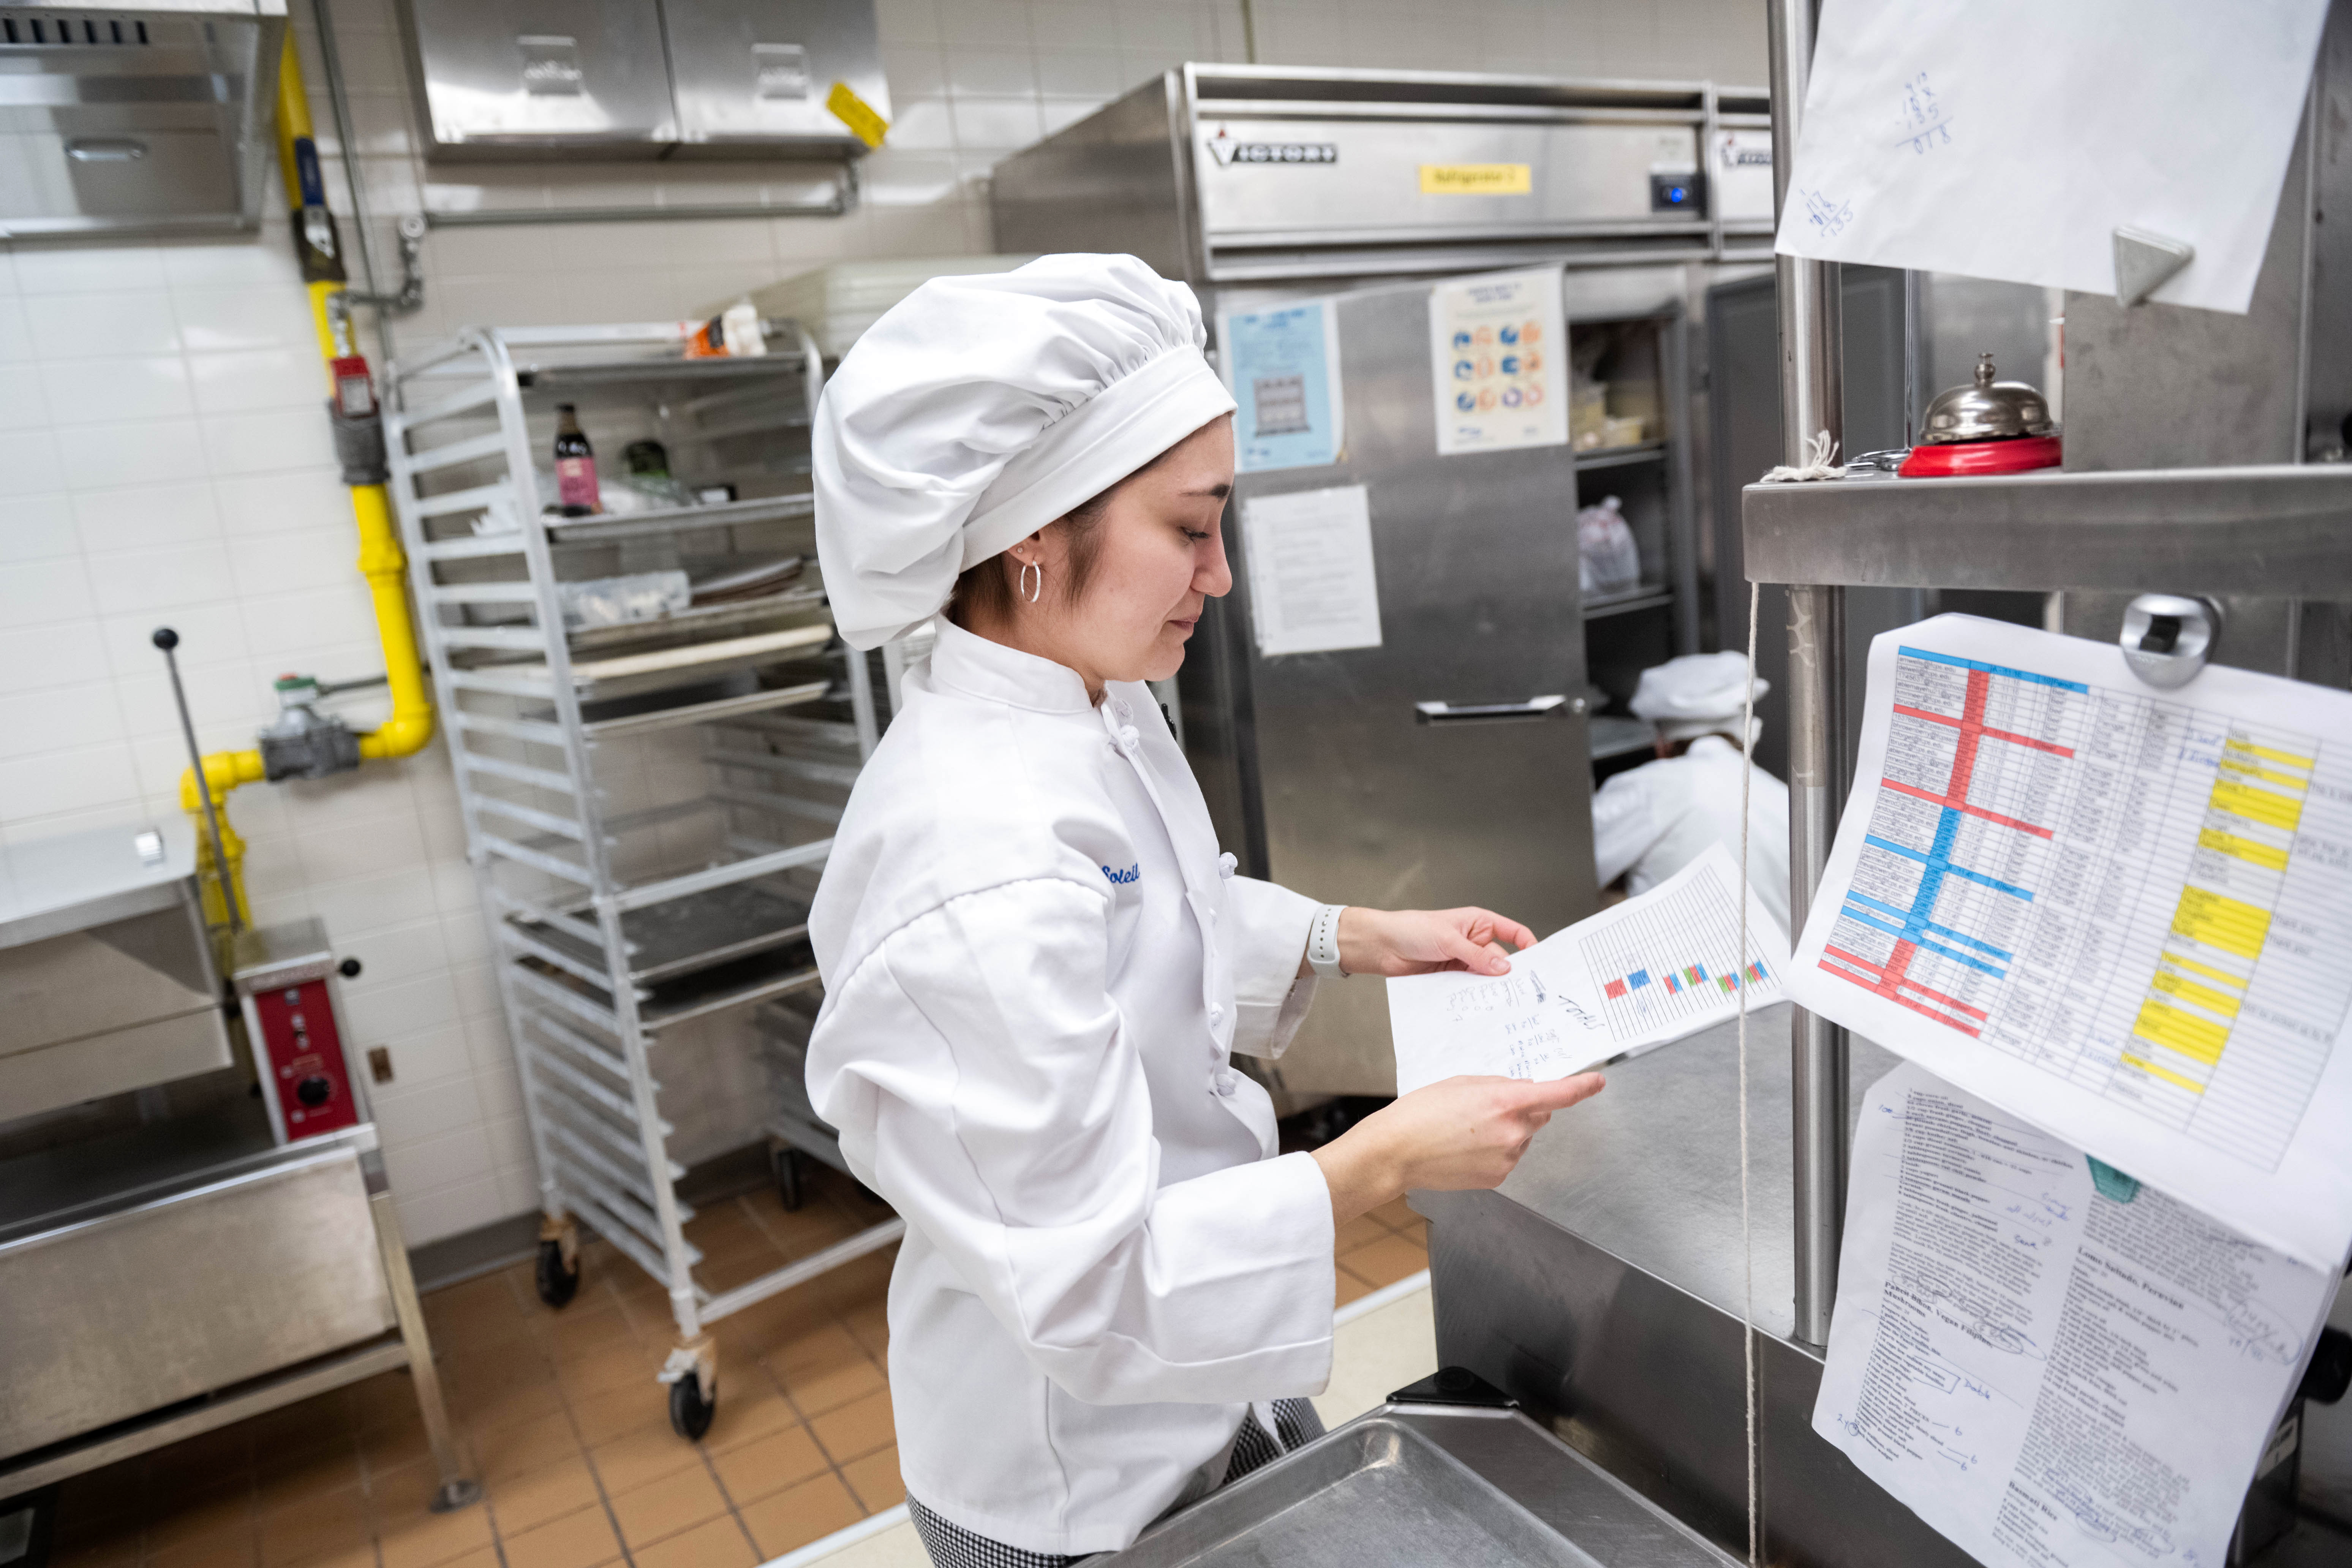 A student in the kitchen checks off the orders as they come in